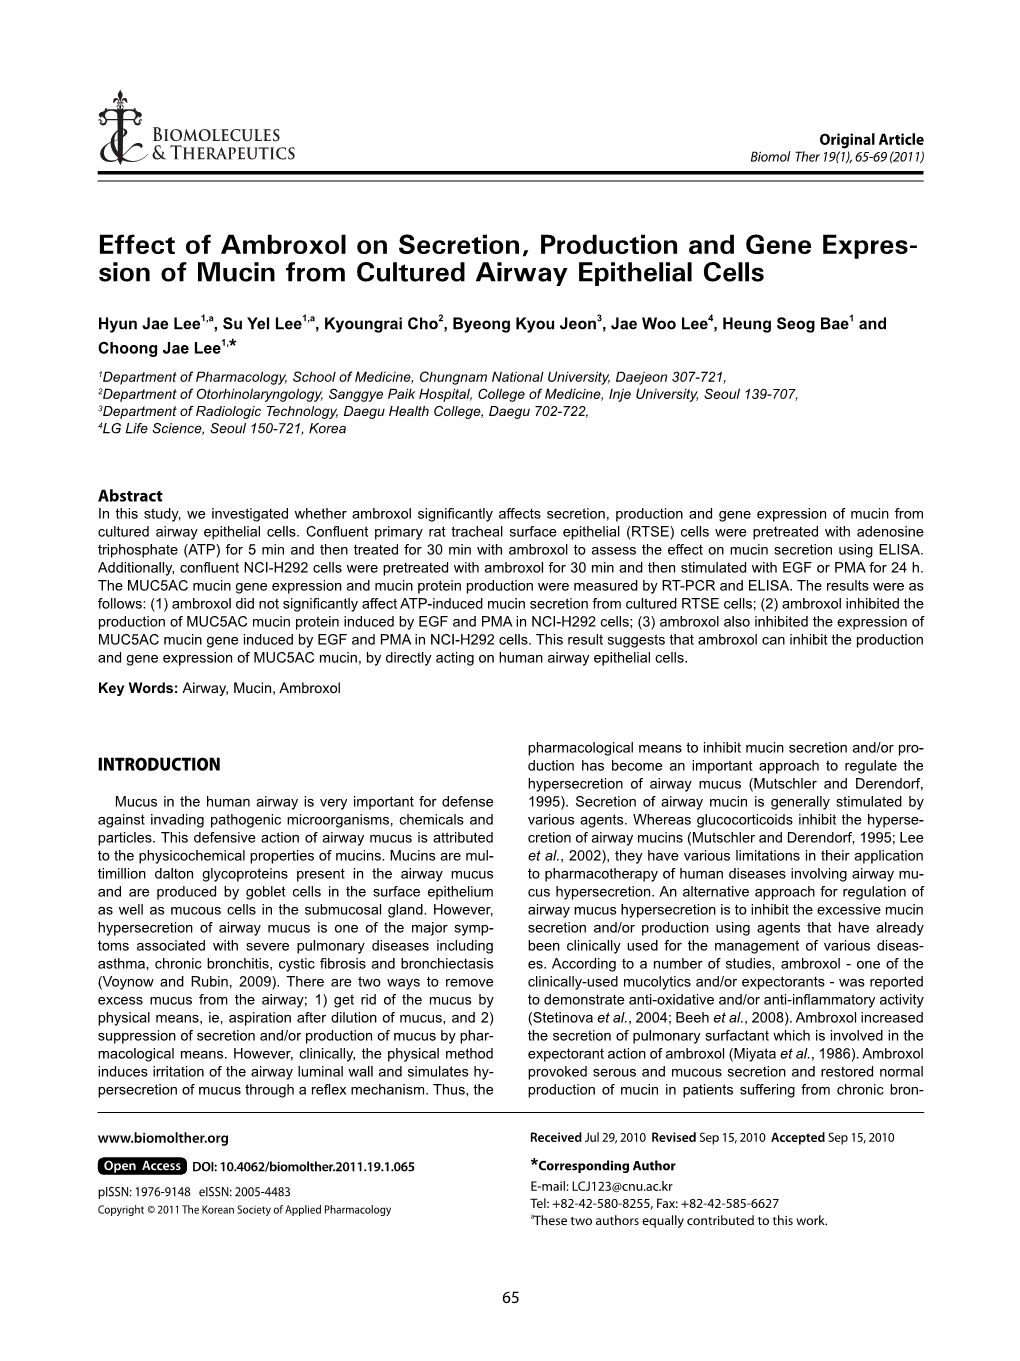 Effect of Ambroxol on Secretion, Production and Gene Expres- Sion of Mucin from Cultured Airway Epithelial Cells